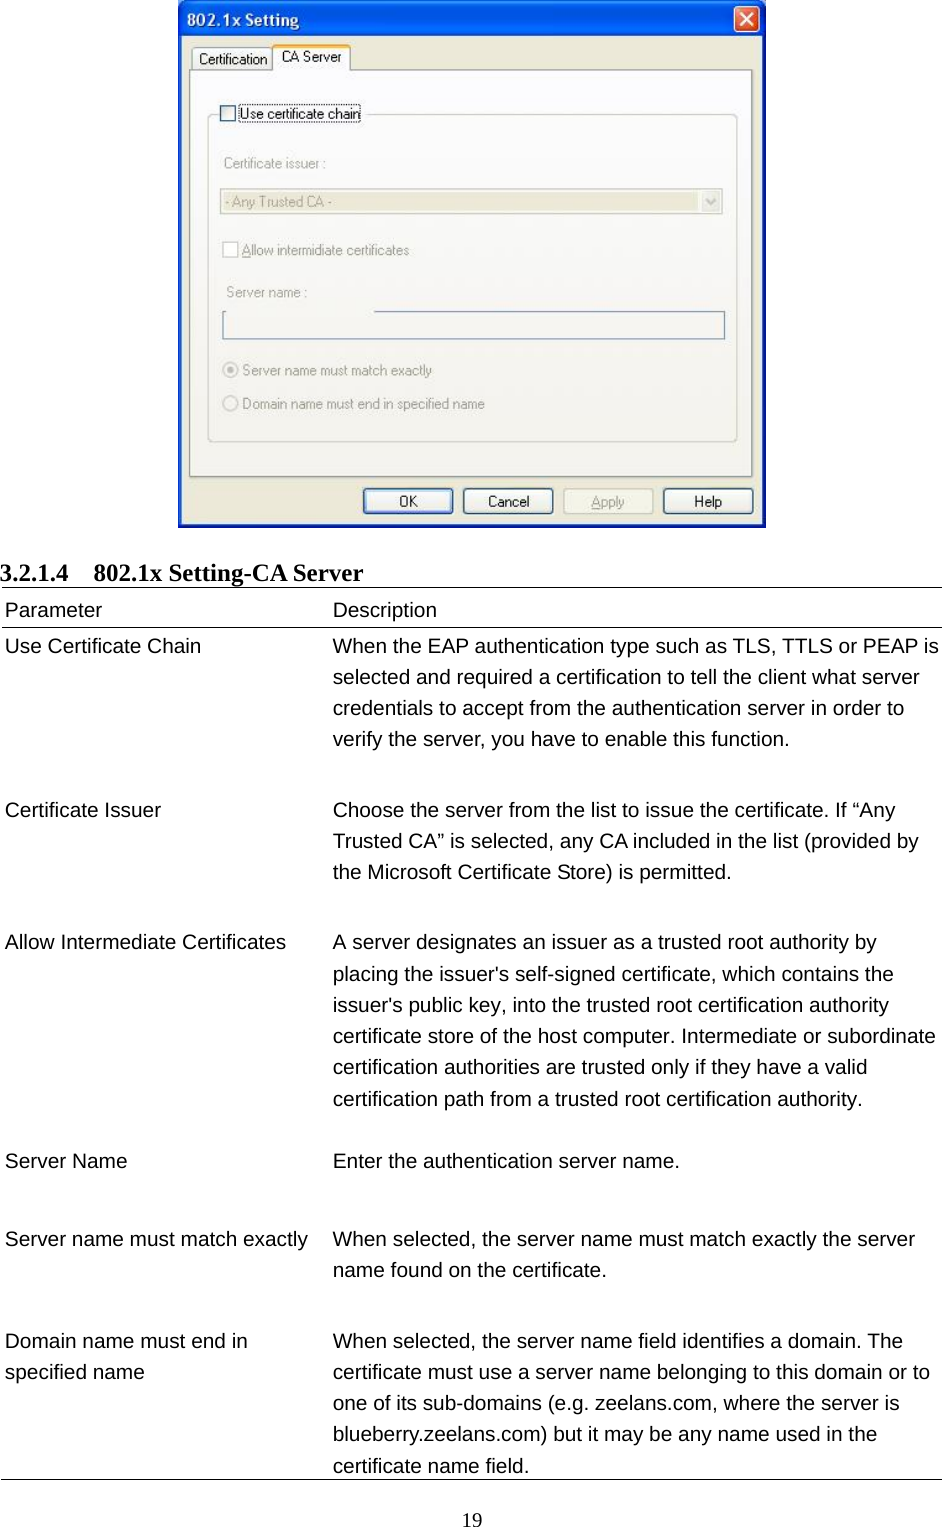  19   3.2.1.4  802.1x Setting-CA Server Parameter Description Use Certificate Chain  When the EAP authentication type such as TLS, TTLS or PEAP is selected and required a certification to tell the client what server credentials to accept from the authentication server in order to verify the server, you have to enable this function.   Certificate Issuer  Choose the server from the list to issue the certificate. If “Any Trusted CA” is selected, any CA included in the list (provided by the Microsoft Certificate Store) is permitted.   Allow Intermediate Certificates  A server designates an issuer as a trusted root authority by placing the issuer&apos;s self-signed certificate, which contains the issuer&apos;s public key, into the trusted root certification authority certificate store of the host computer. Intermediate or subordinate certification authorities are trusted only if they have a valid certification path from a trusted root certification authority.    Server Name  Enter the authentication server name.   Server name must match exactly  When selected, the server name must match exactly the server name found on the certificate.     Domain name must end in specified name When selected, the server name field identifies a domain. The certificate must use a server name belonging to this domain or to one of its sub-domains (e.g. zeelans.com, where the server is blueberry.zeelans.com) but it may be any name used in the certificate name field. 